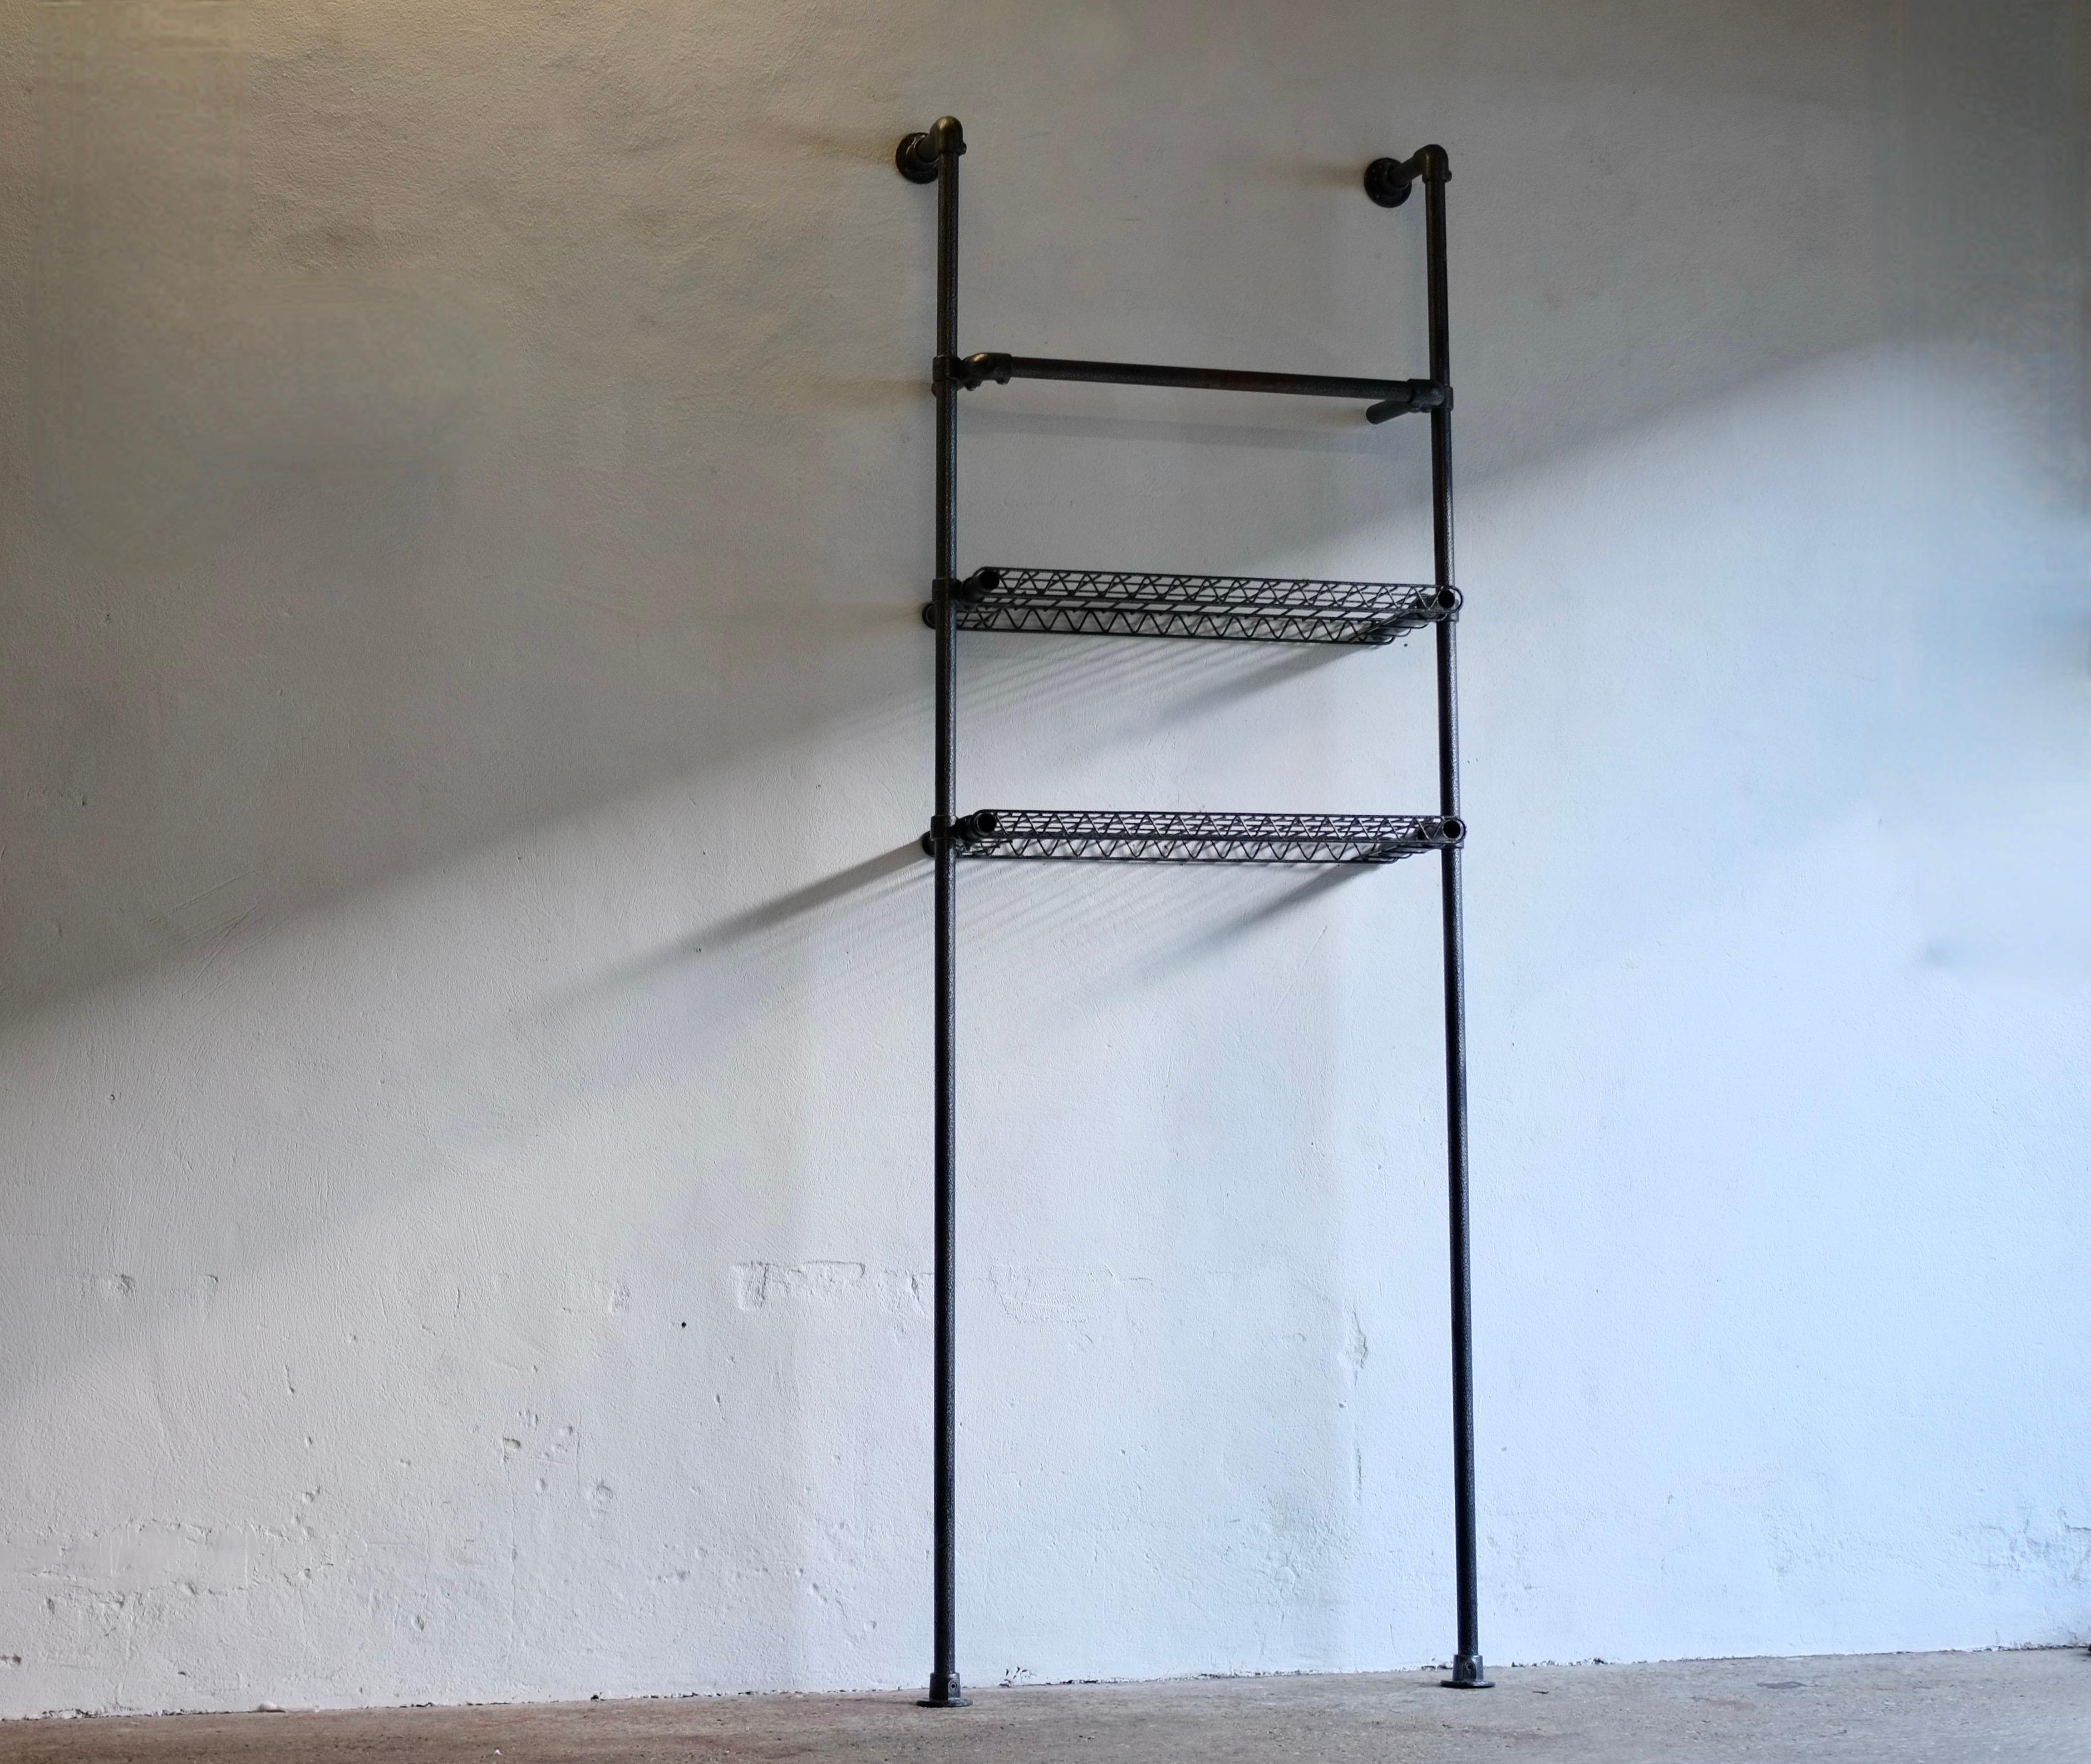 A tall Klee Klamp shelving unit designed by Ron Arad (b.1951) and produced by One Off Ltd, circa 1985. 

Tubular steel frame, cast iron joints and mesh shelves. The unit is in good condition with some surface loss (see photos).

H 250 W 91 D 32 cm